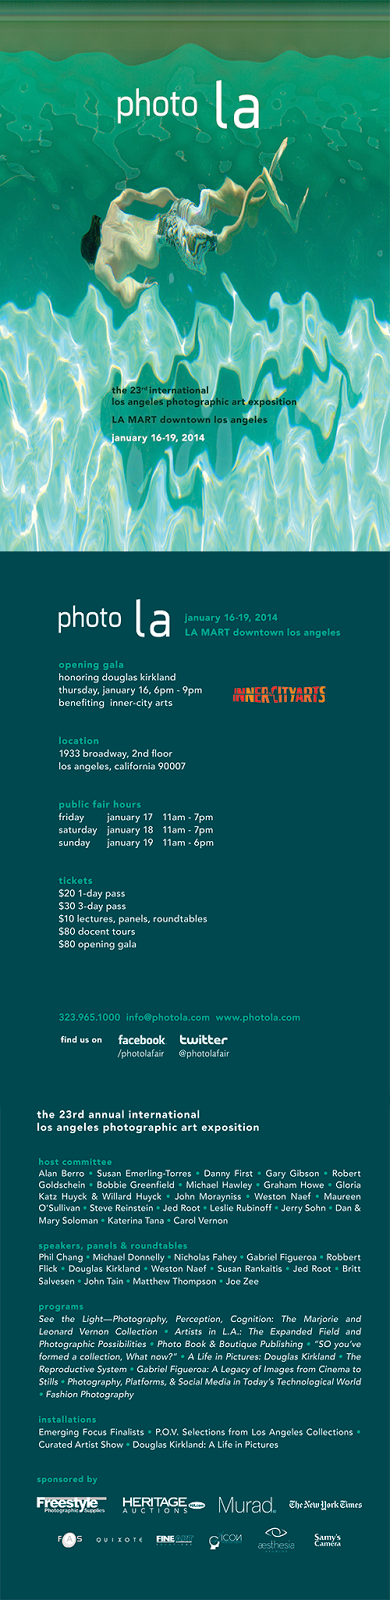 Image #1 for Monroe Gallery at Photo LA 2014 January 16 - 19